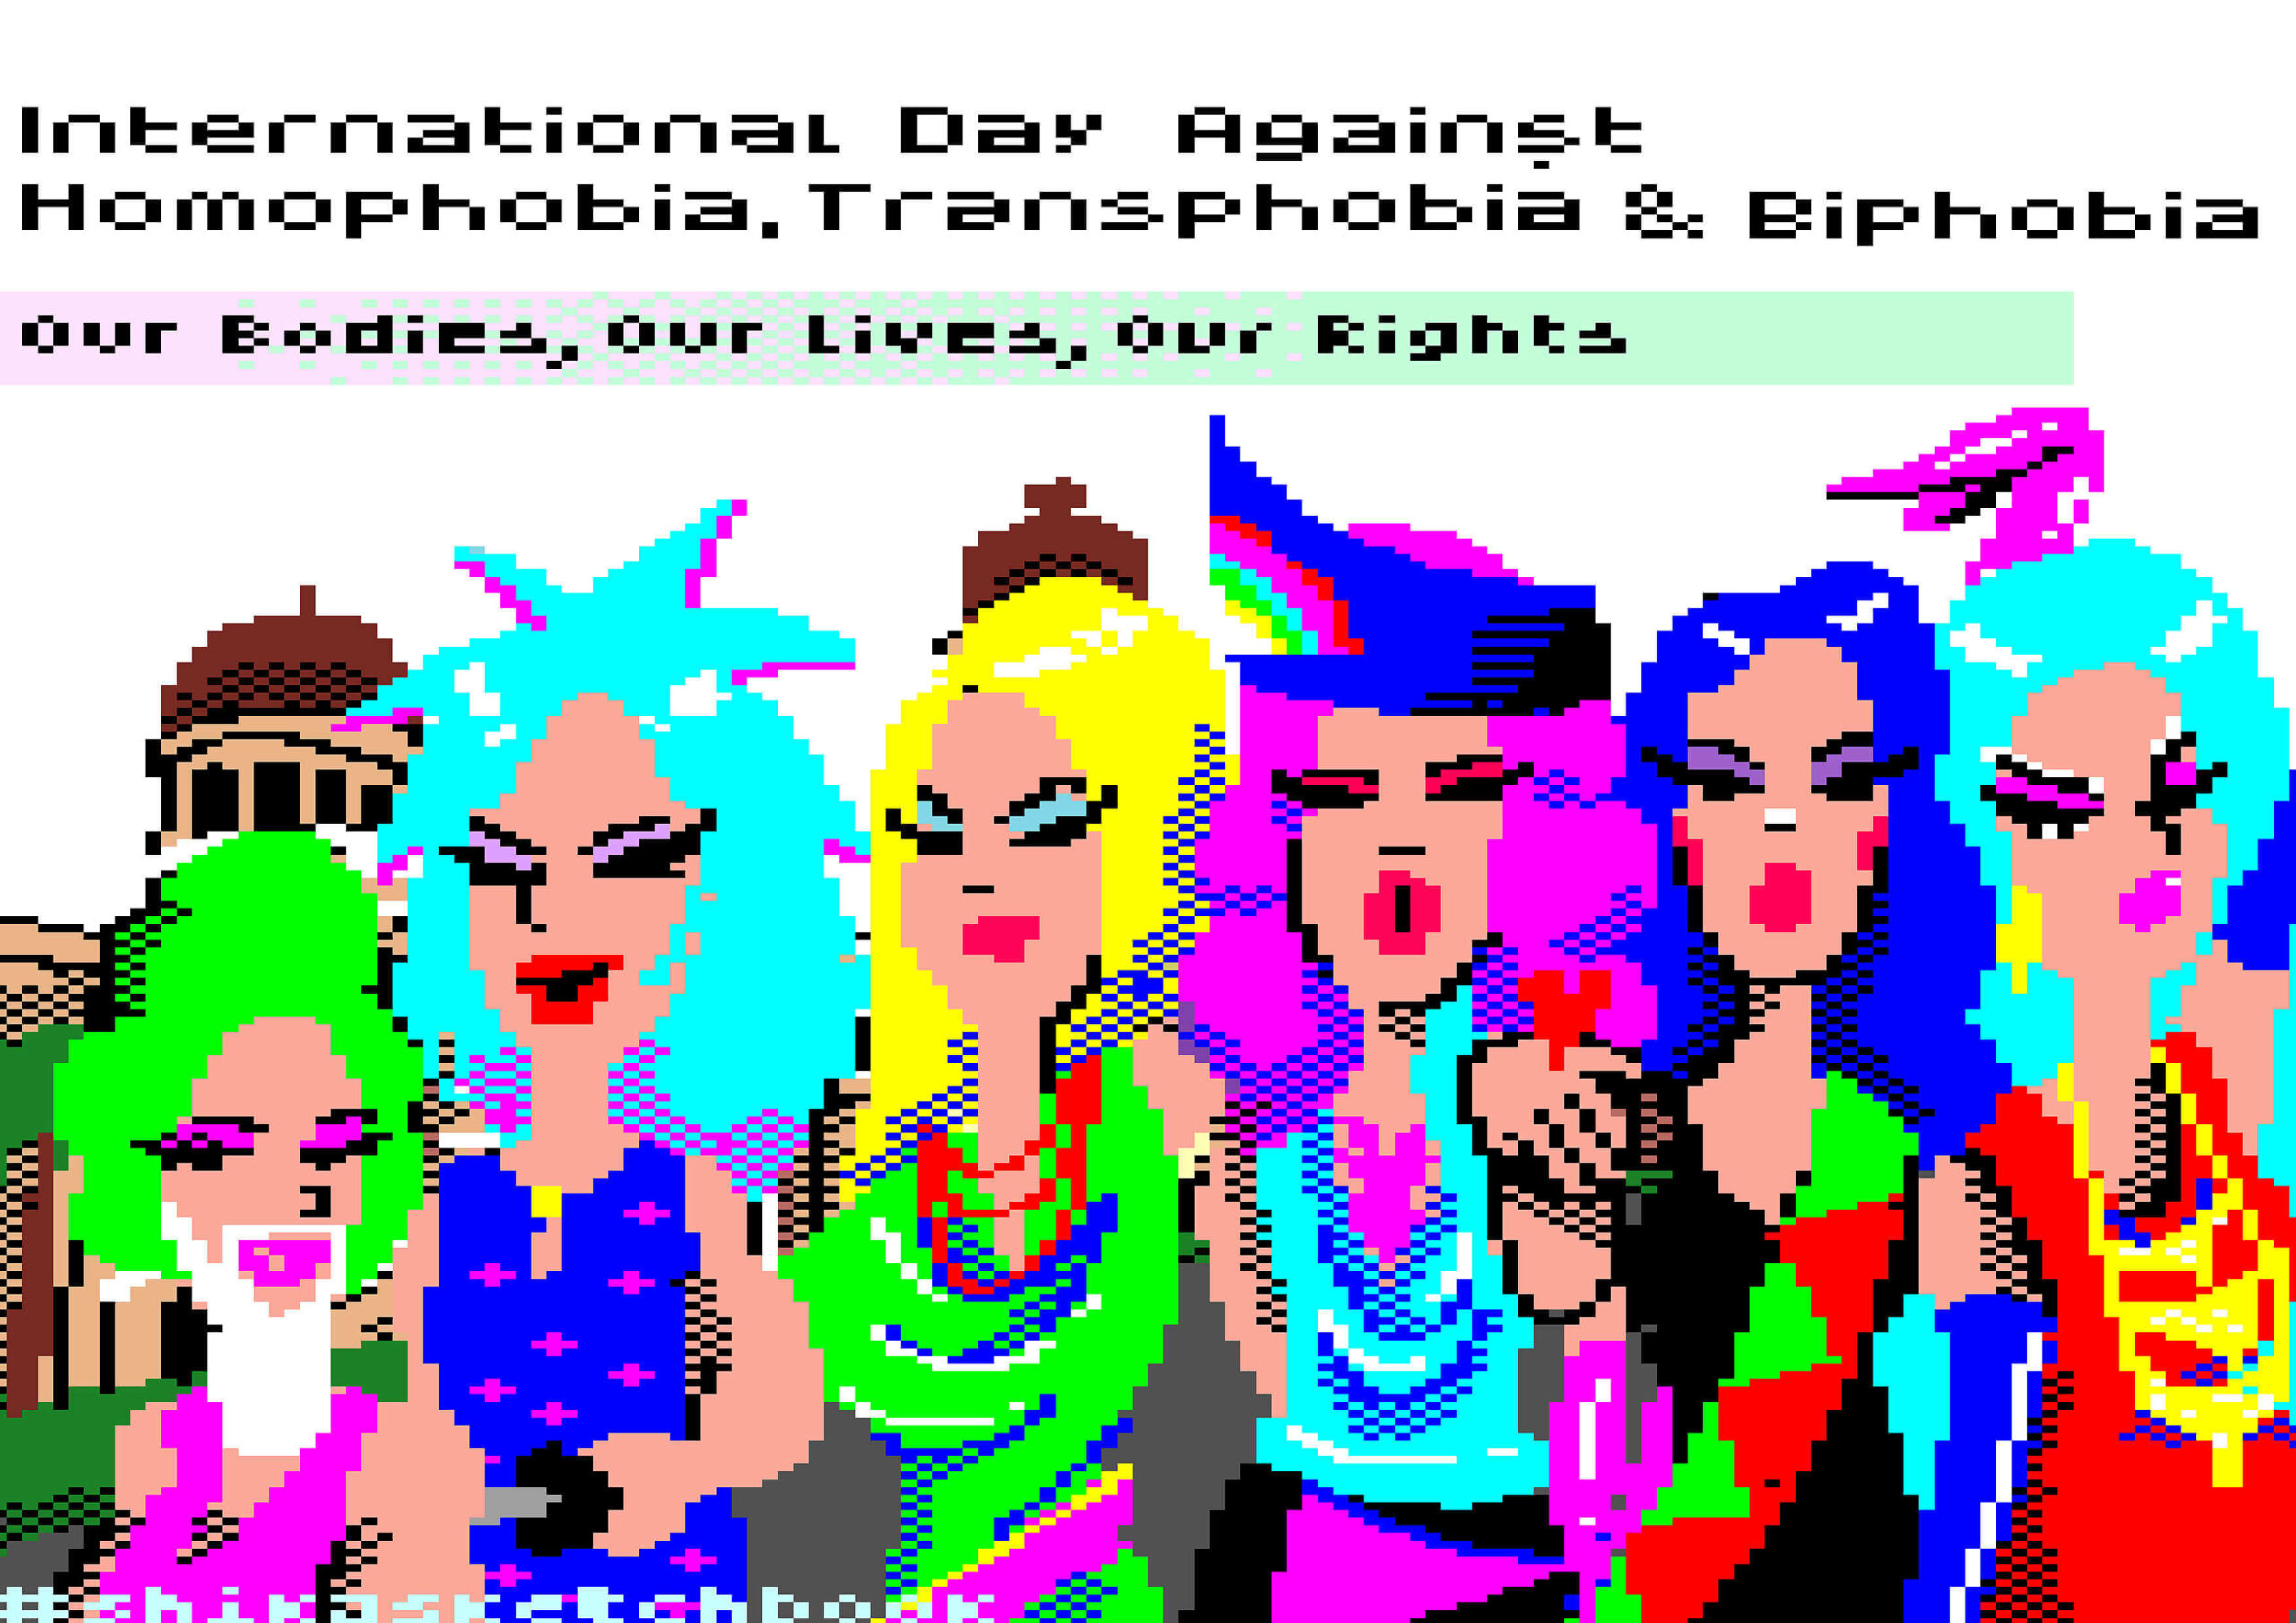 In a pixel art portrayal, the words “International Day Against Homophobia, Transphobia & Biphobia / Our Bodies, Our Lives, Our Rights” are placed above a colorful illustration of 6 drag queens.